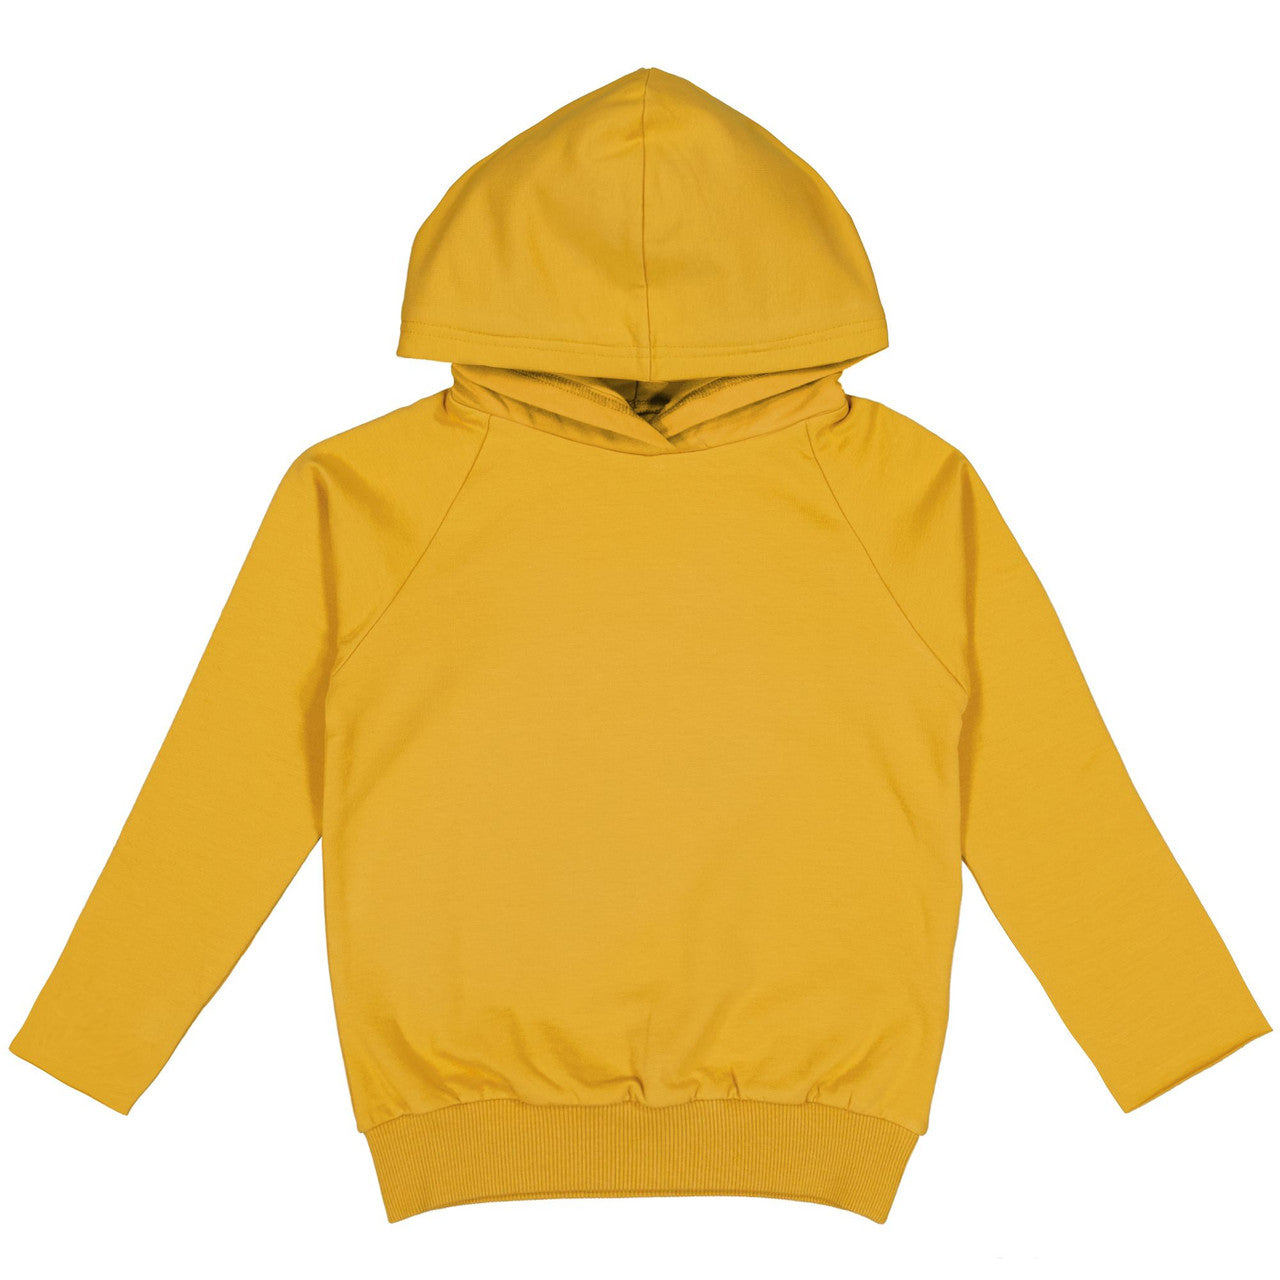 Little Hedonist super soft and cozy organic hooded sweater in warm golden color